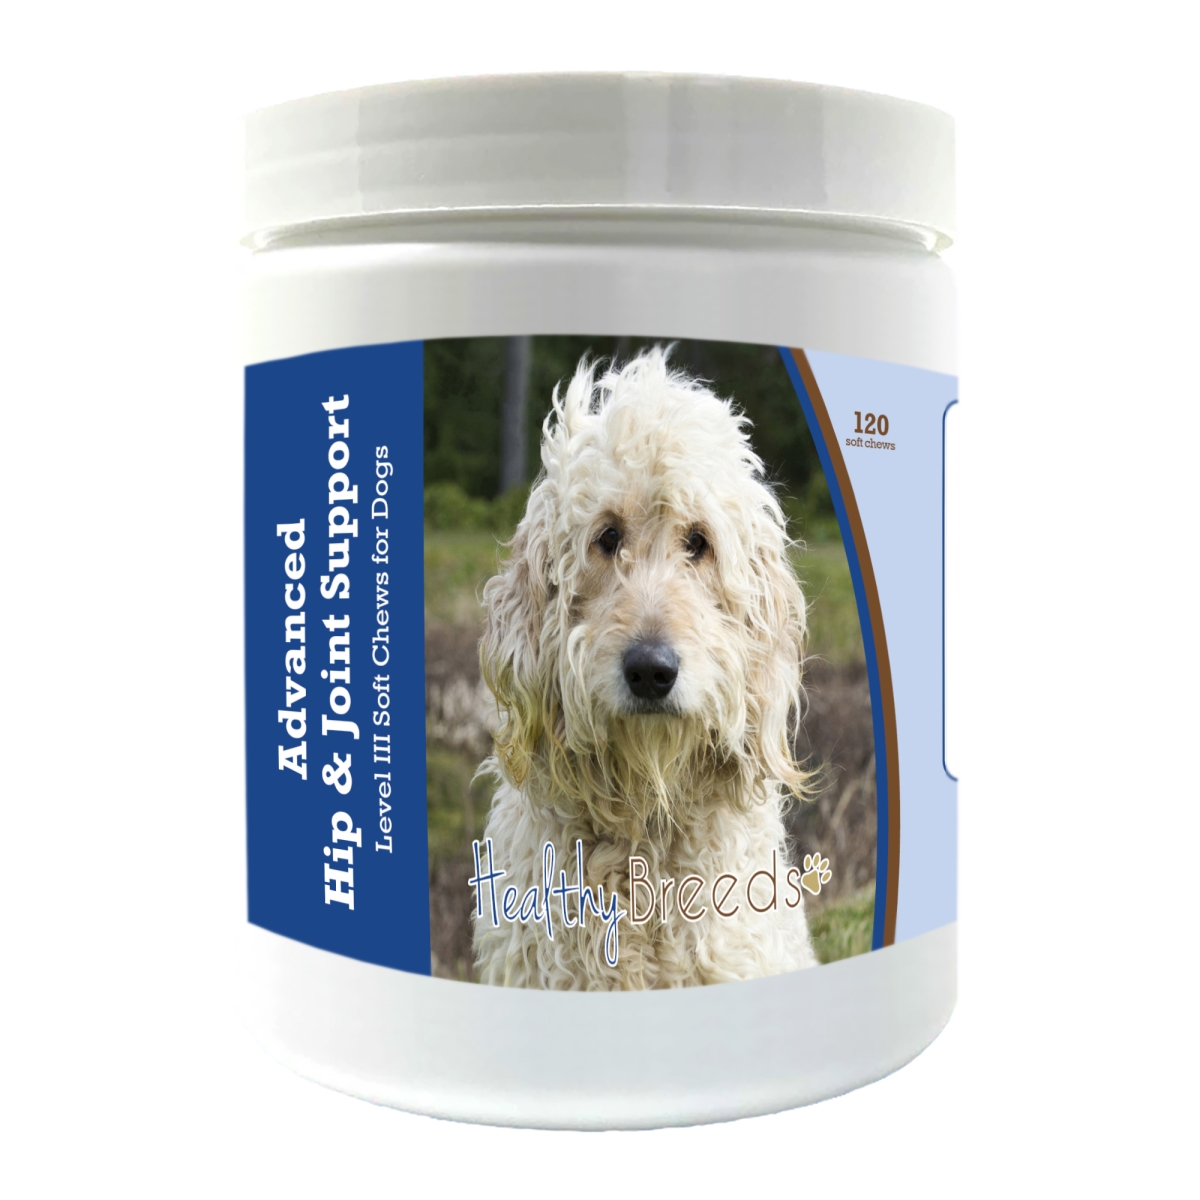 Picture of Healthy Breeds 192959898286 Goldendoodle Advanced Hip & Joint Support Level III Soft Chews for Dogs